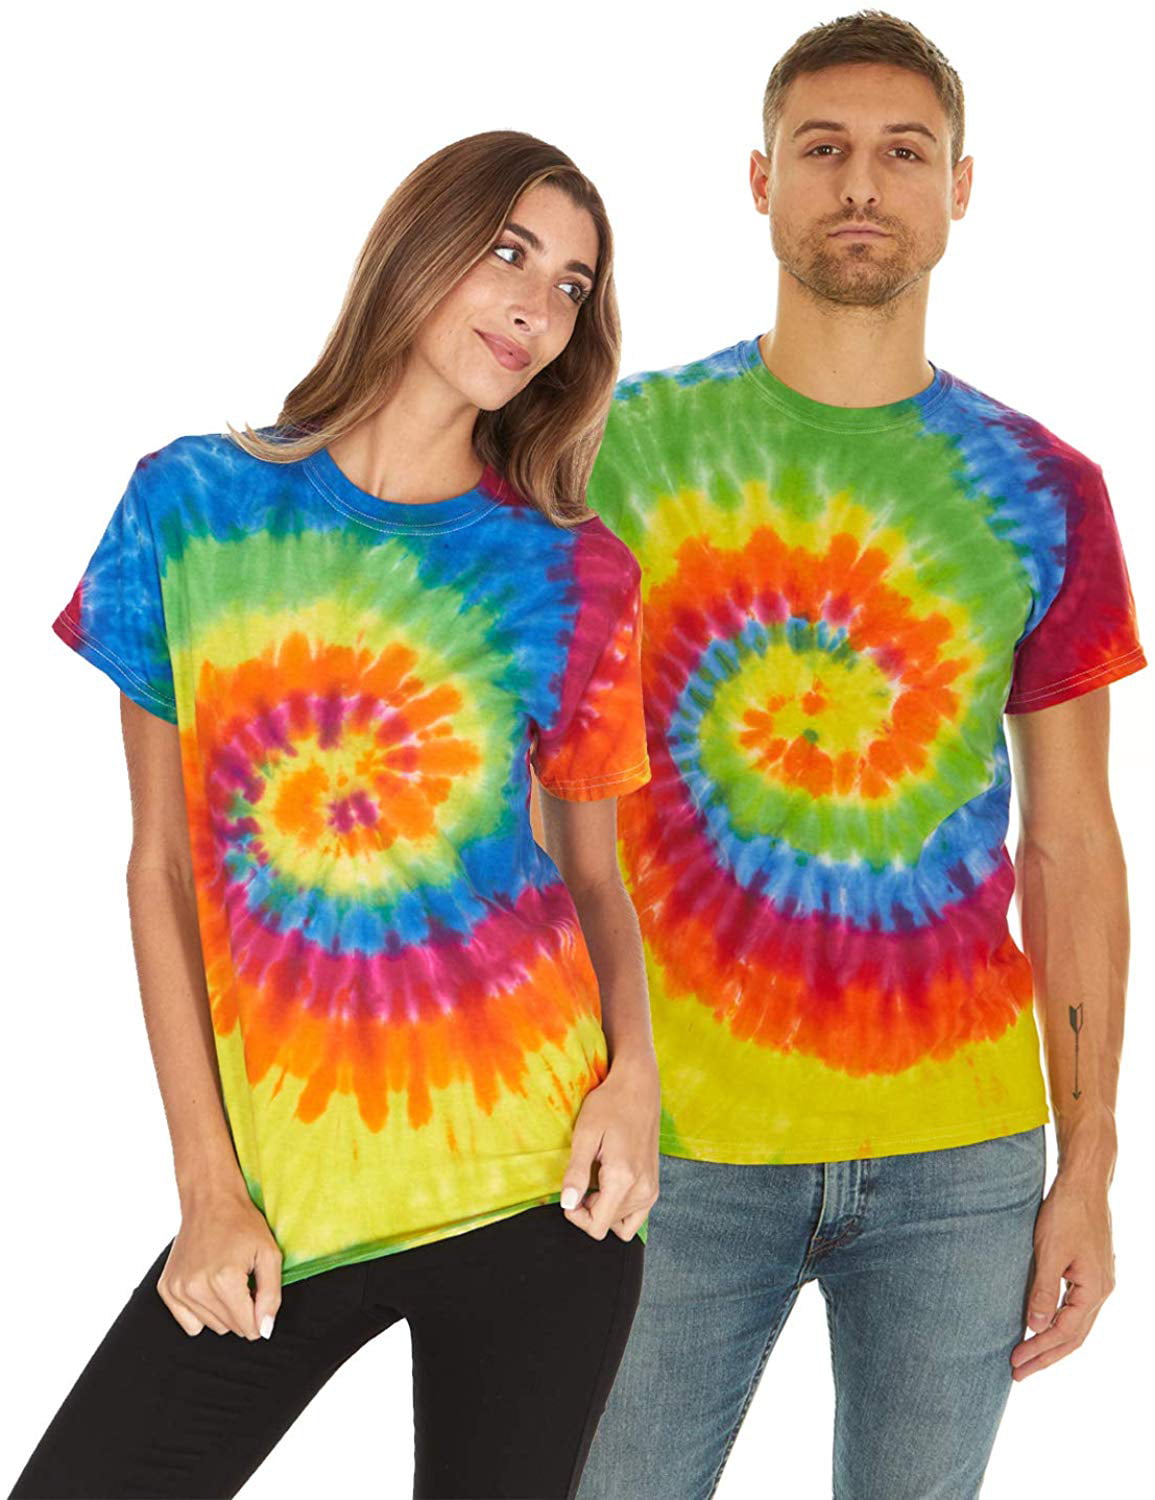 Krazy Tees - Tie Dye Style T-Shirts for Men and Women - Multi Color